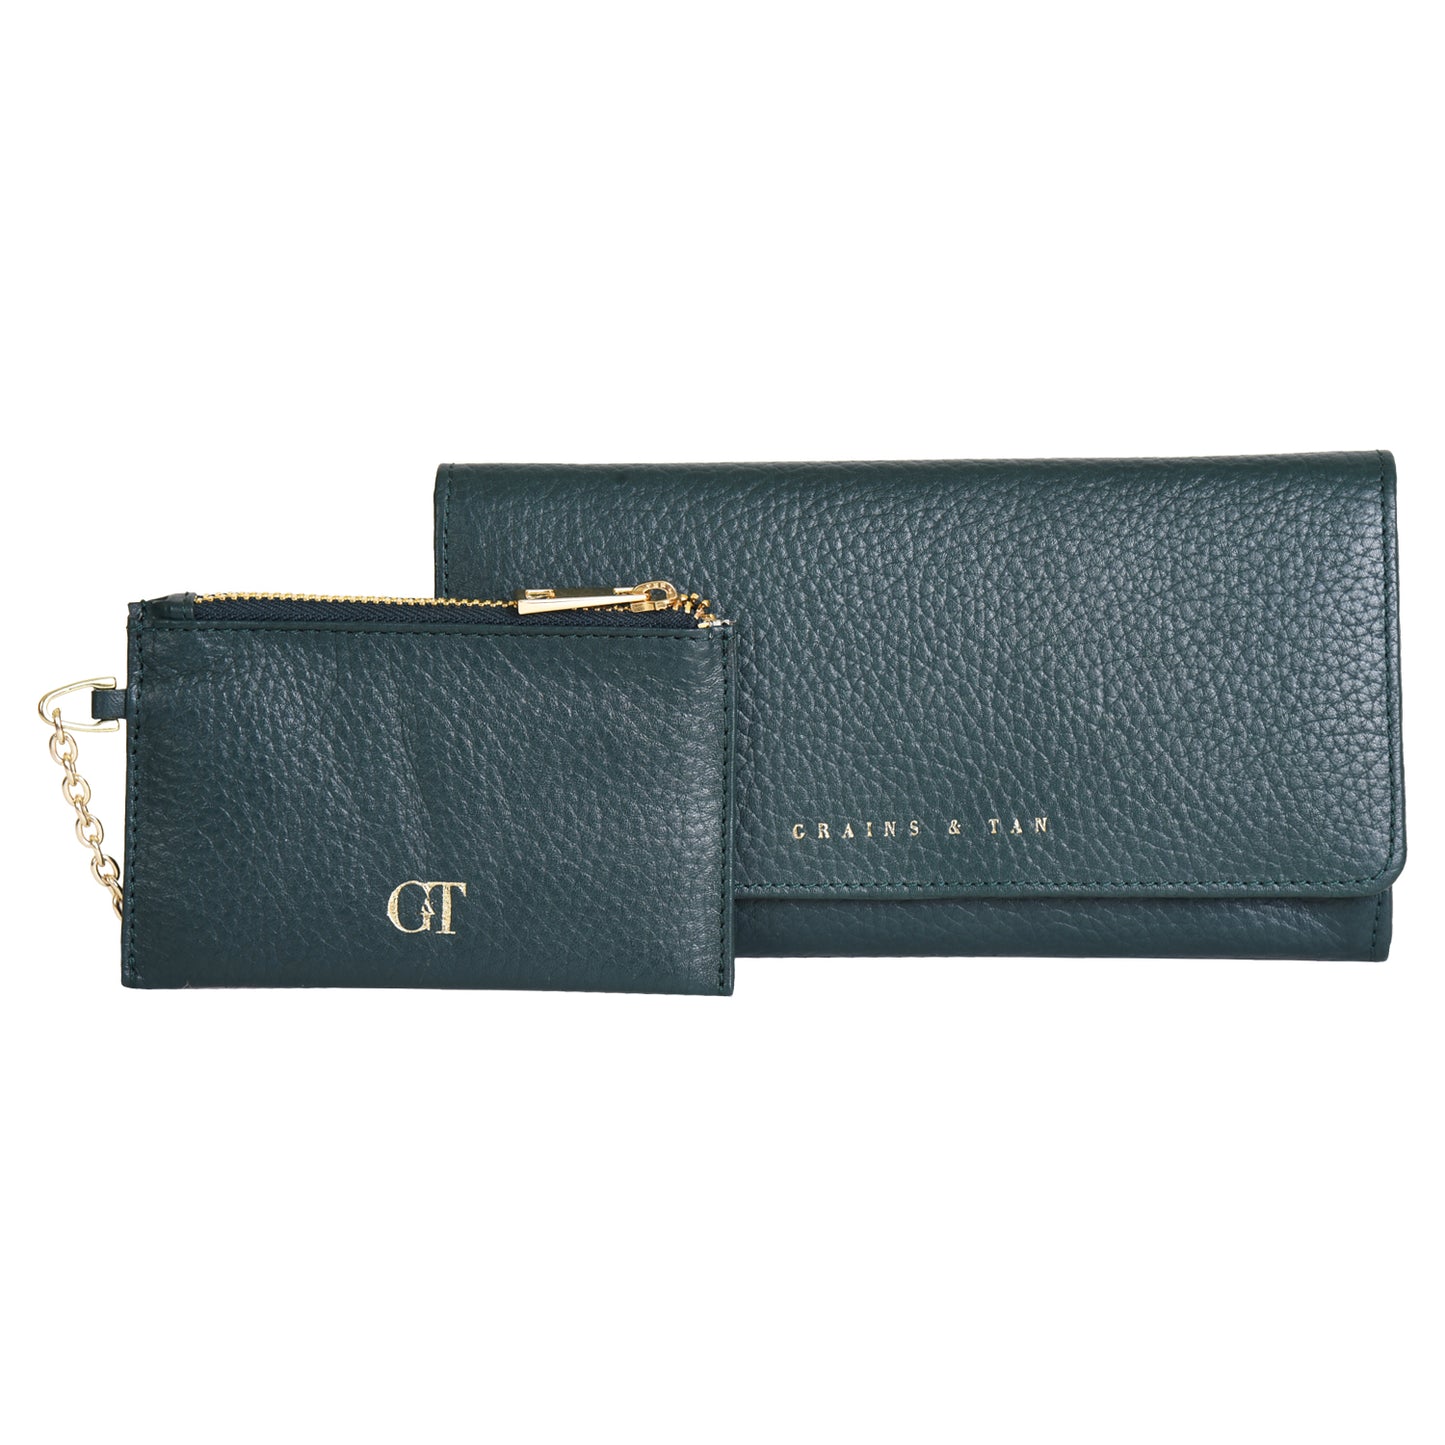 GT-002: G&T Full-grain Ladies Purse with a Detachable Coin Pouch (RFID Protected)